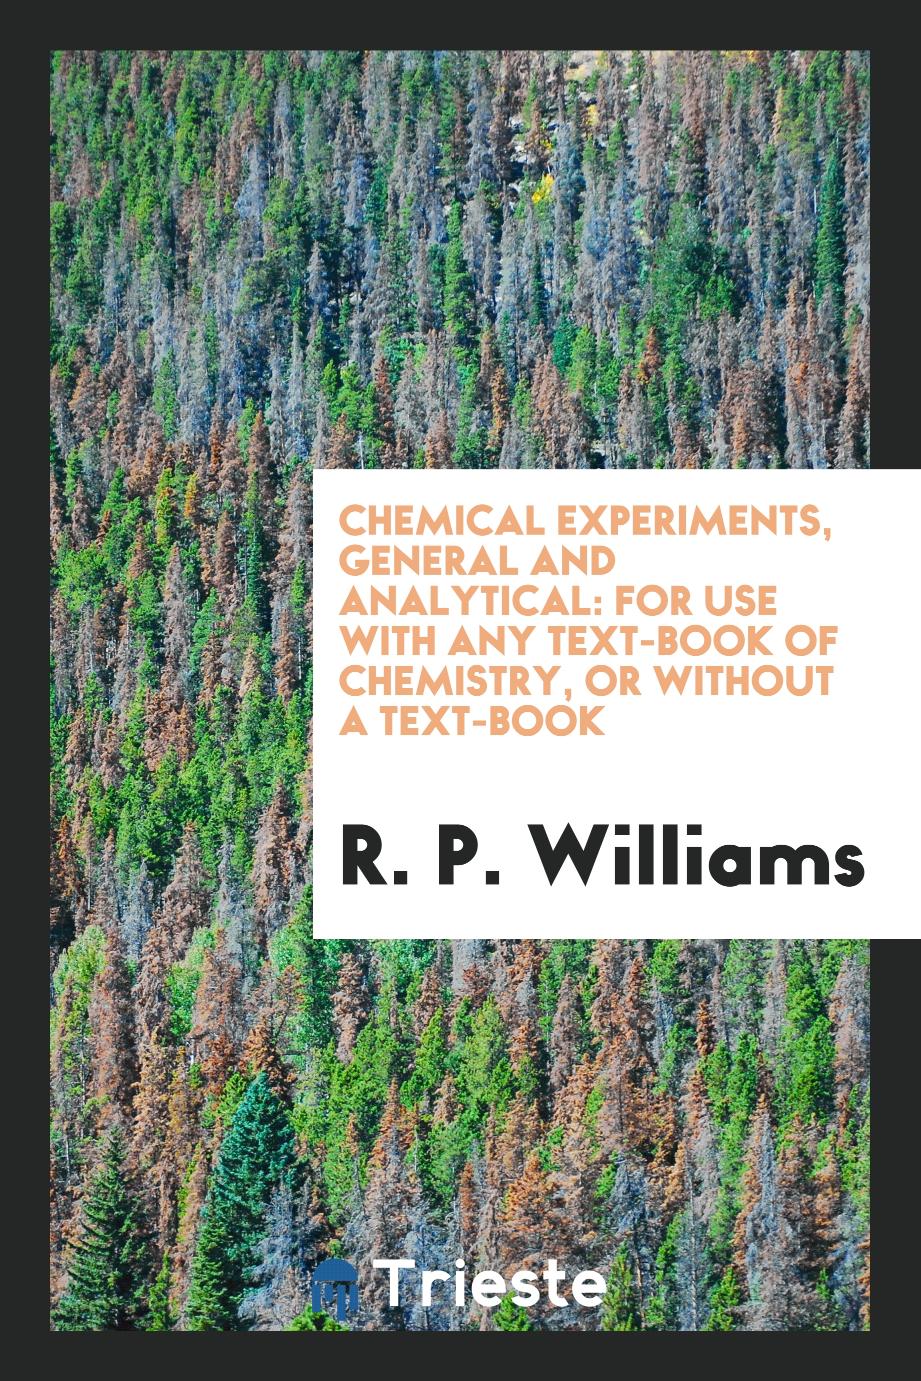 Chemical Experiments, General and Analytical: For Use with Any Text-Book of Chemistry, or Without a Text-Book